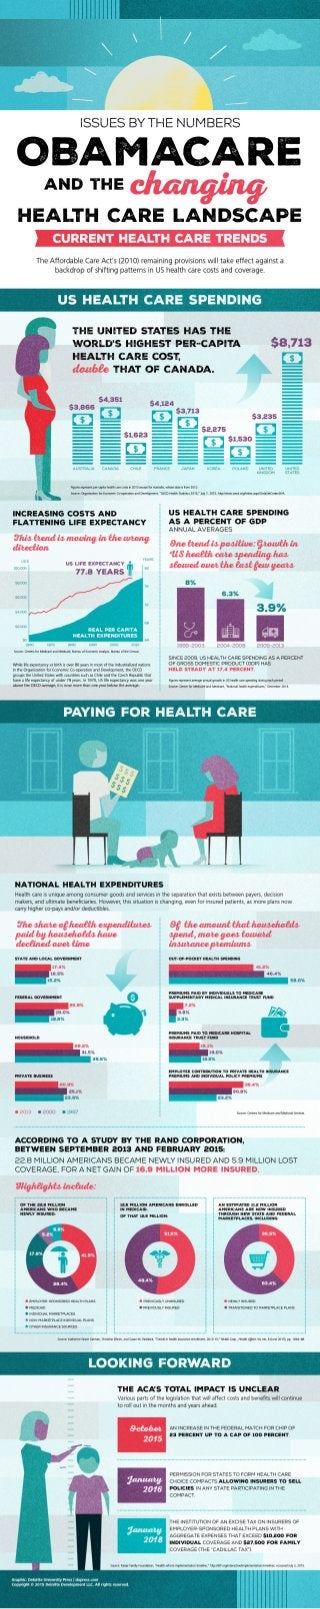 Current trends in health care (infographic)